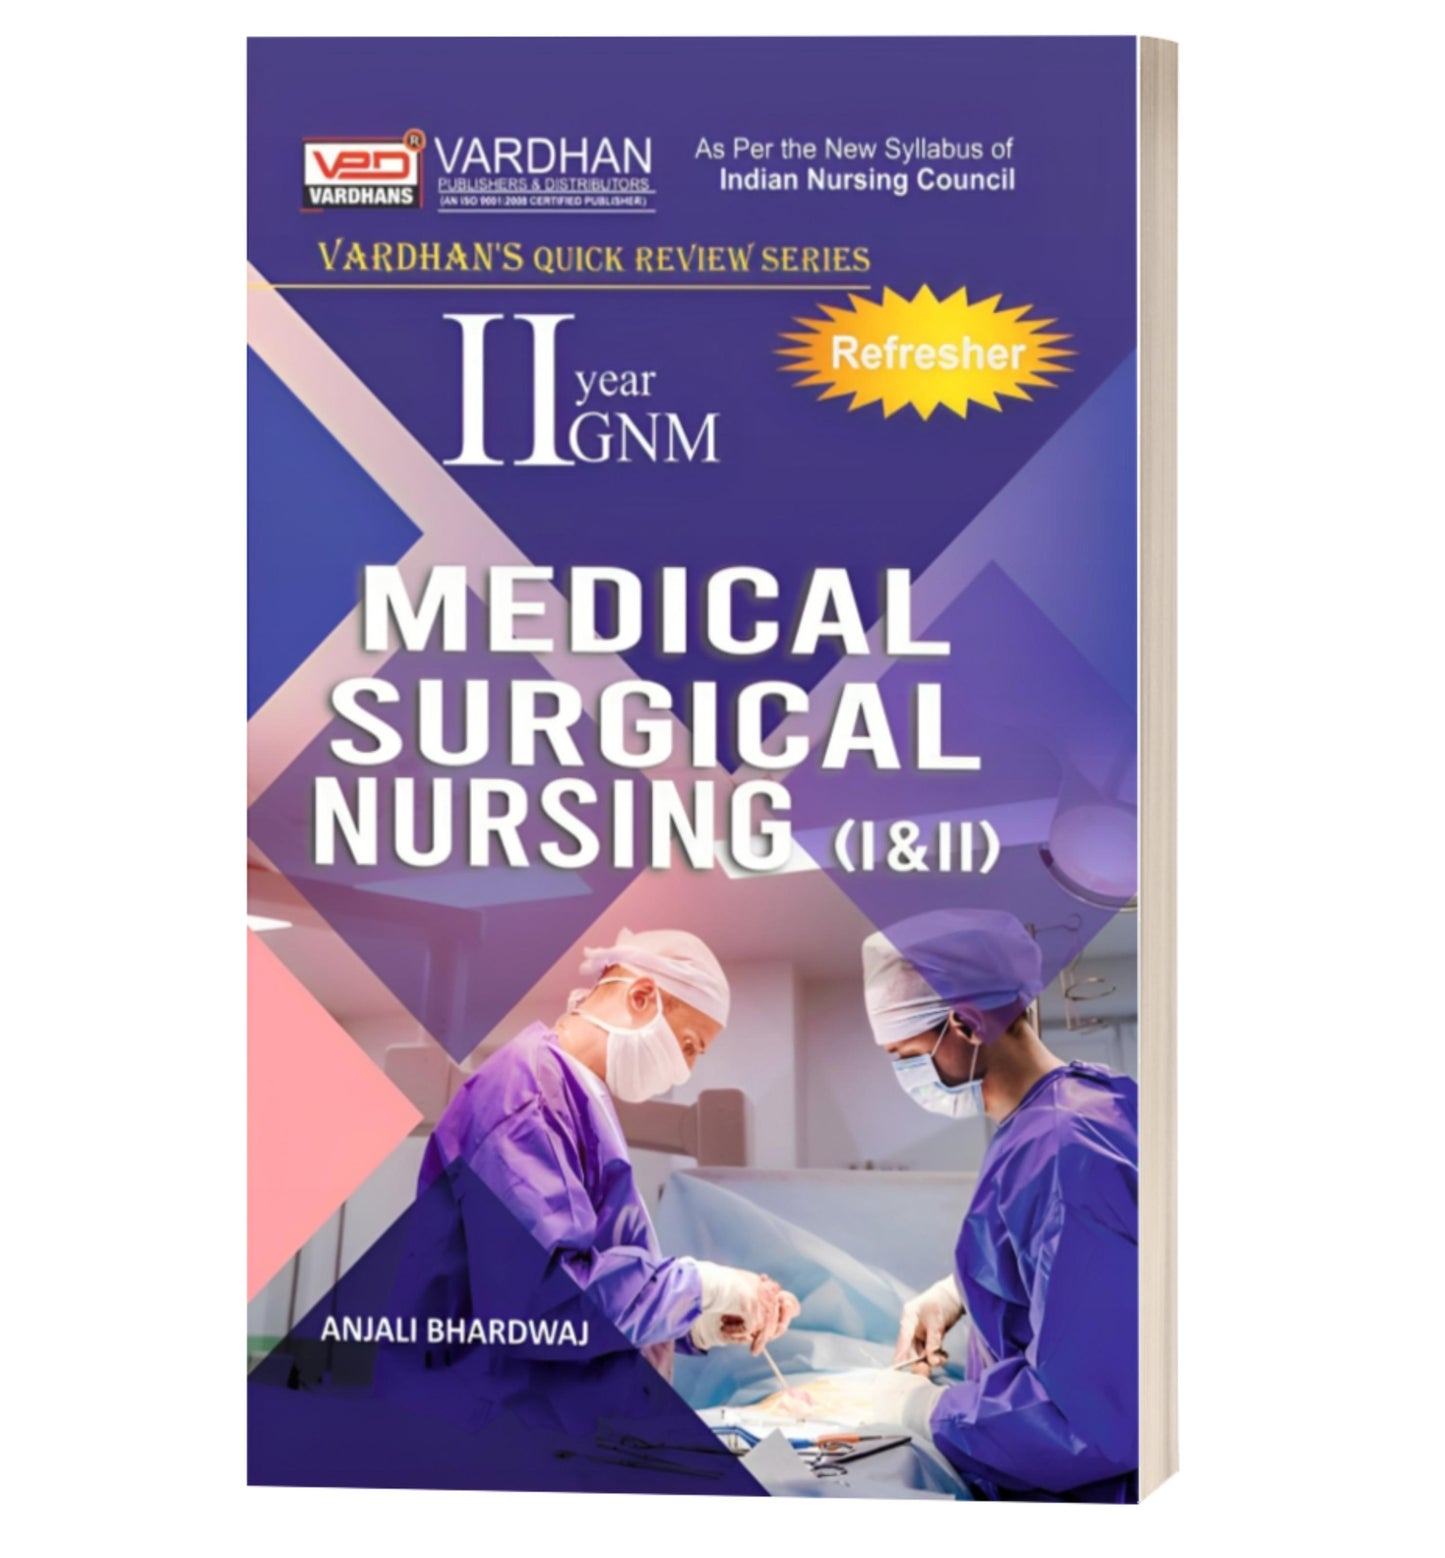 Medical Surgical Nursing (I&II) (Quick Review Series)